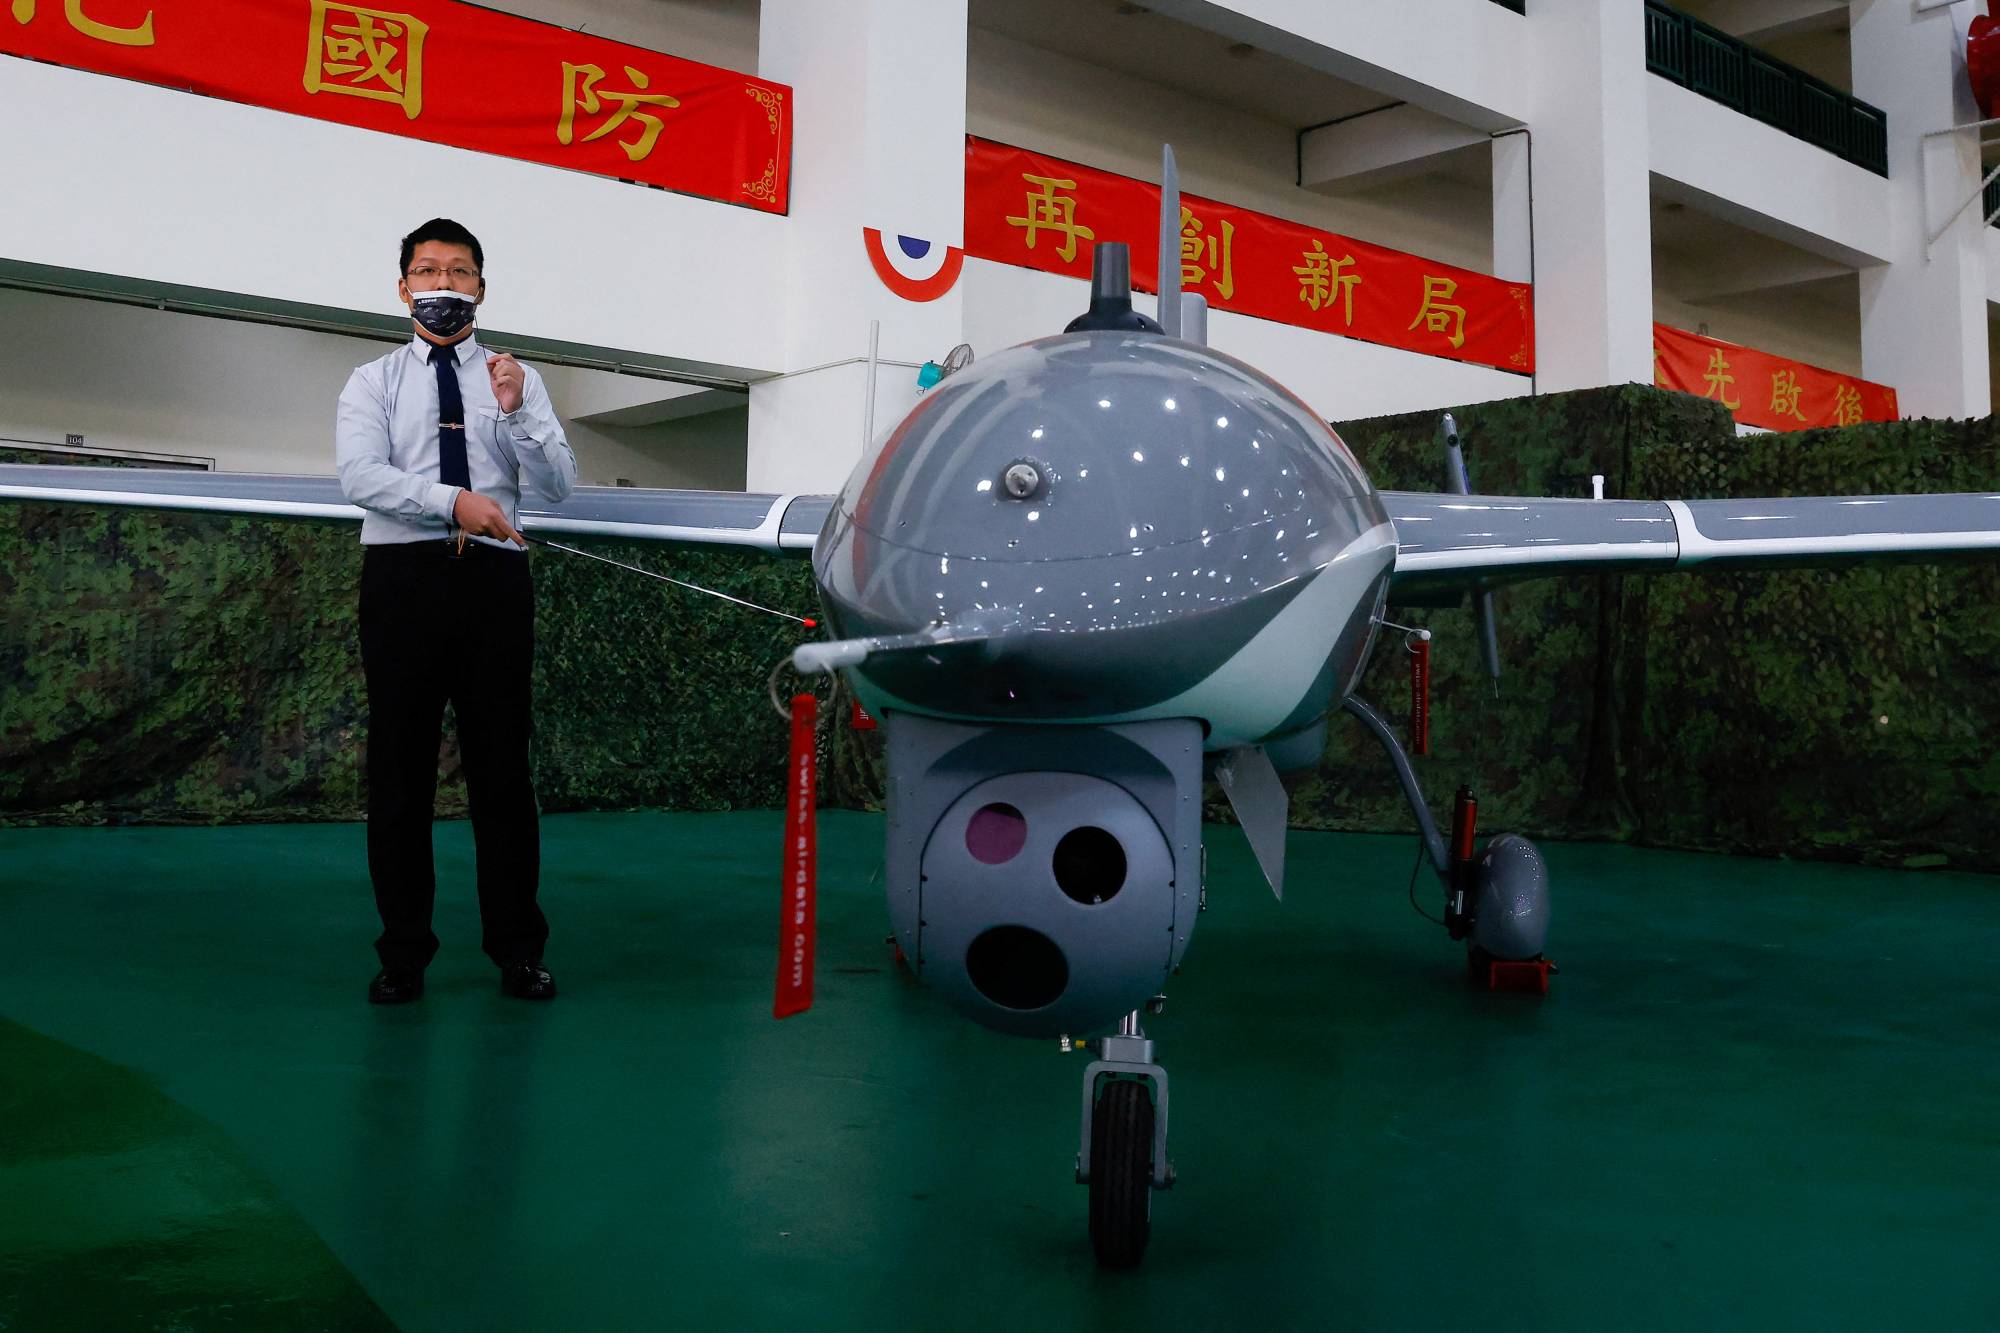 A domestically developed Albatross II unmanned aerial vehicle is displayed at a Taiwanese Defense Ministry media showcase of its drones in Taichung, Taiwan, on March 14. | REUTERS